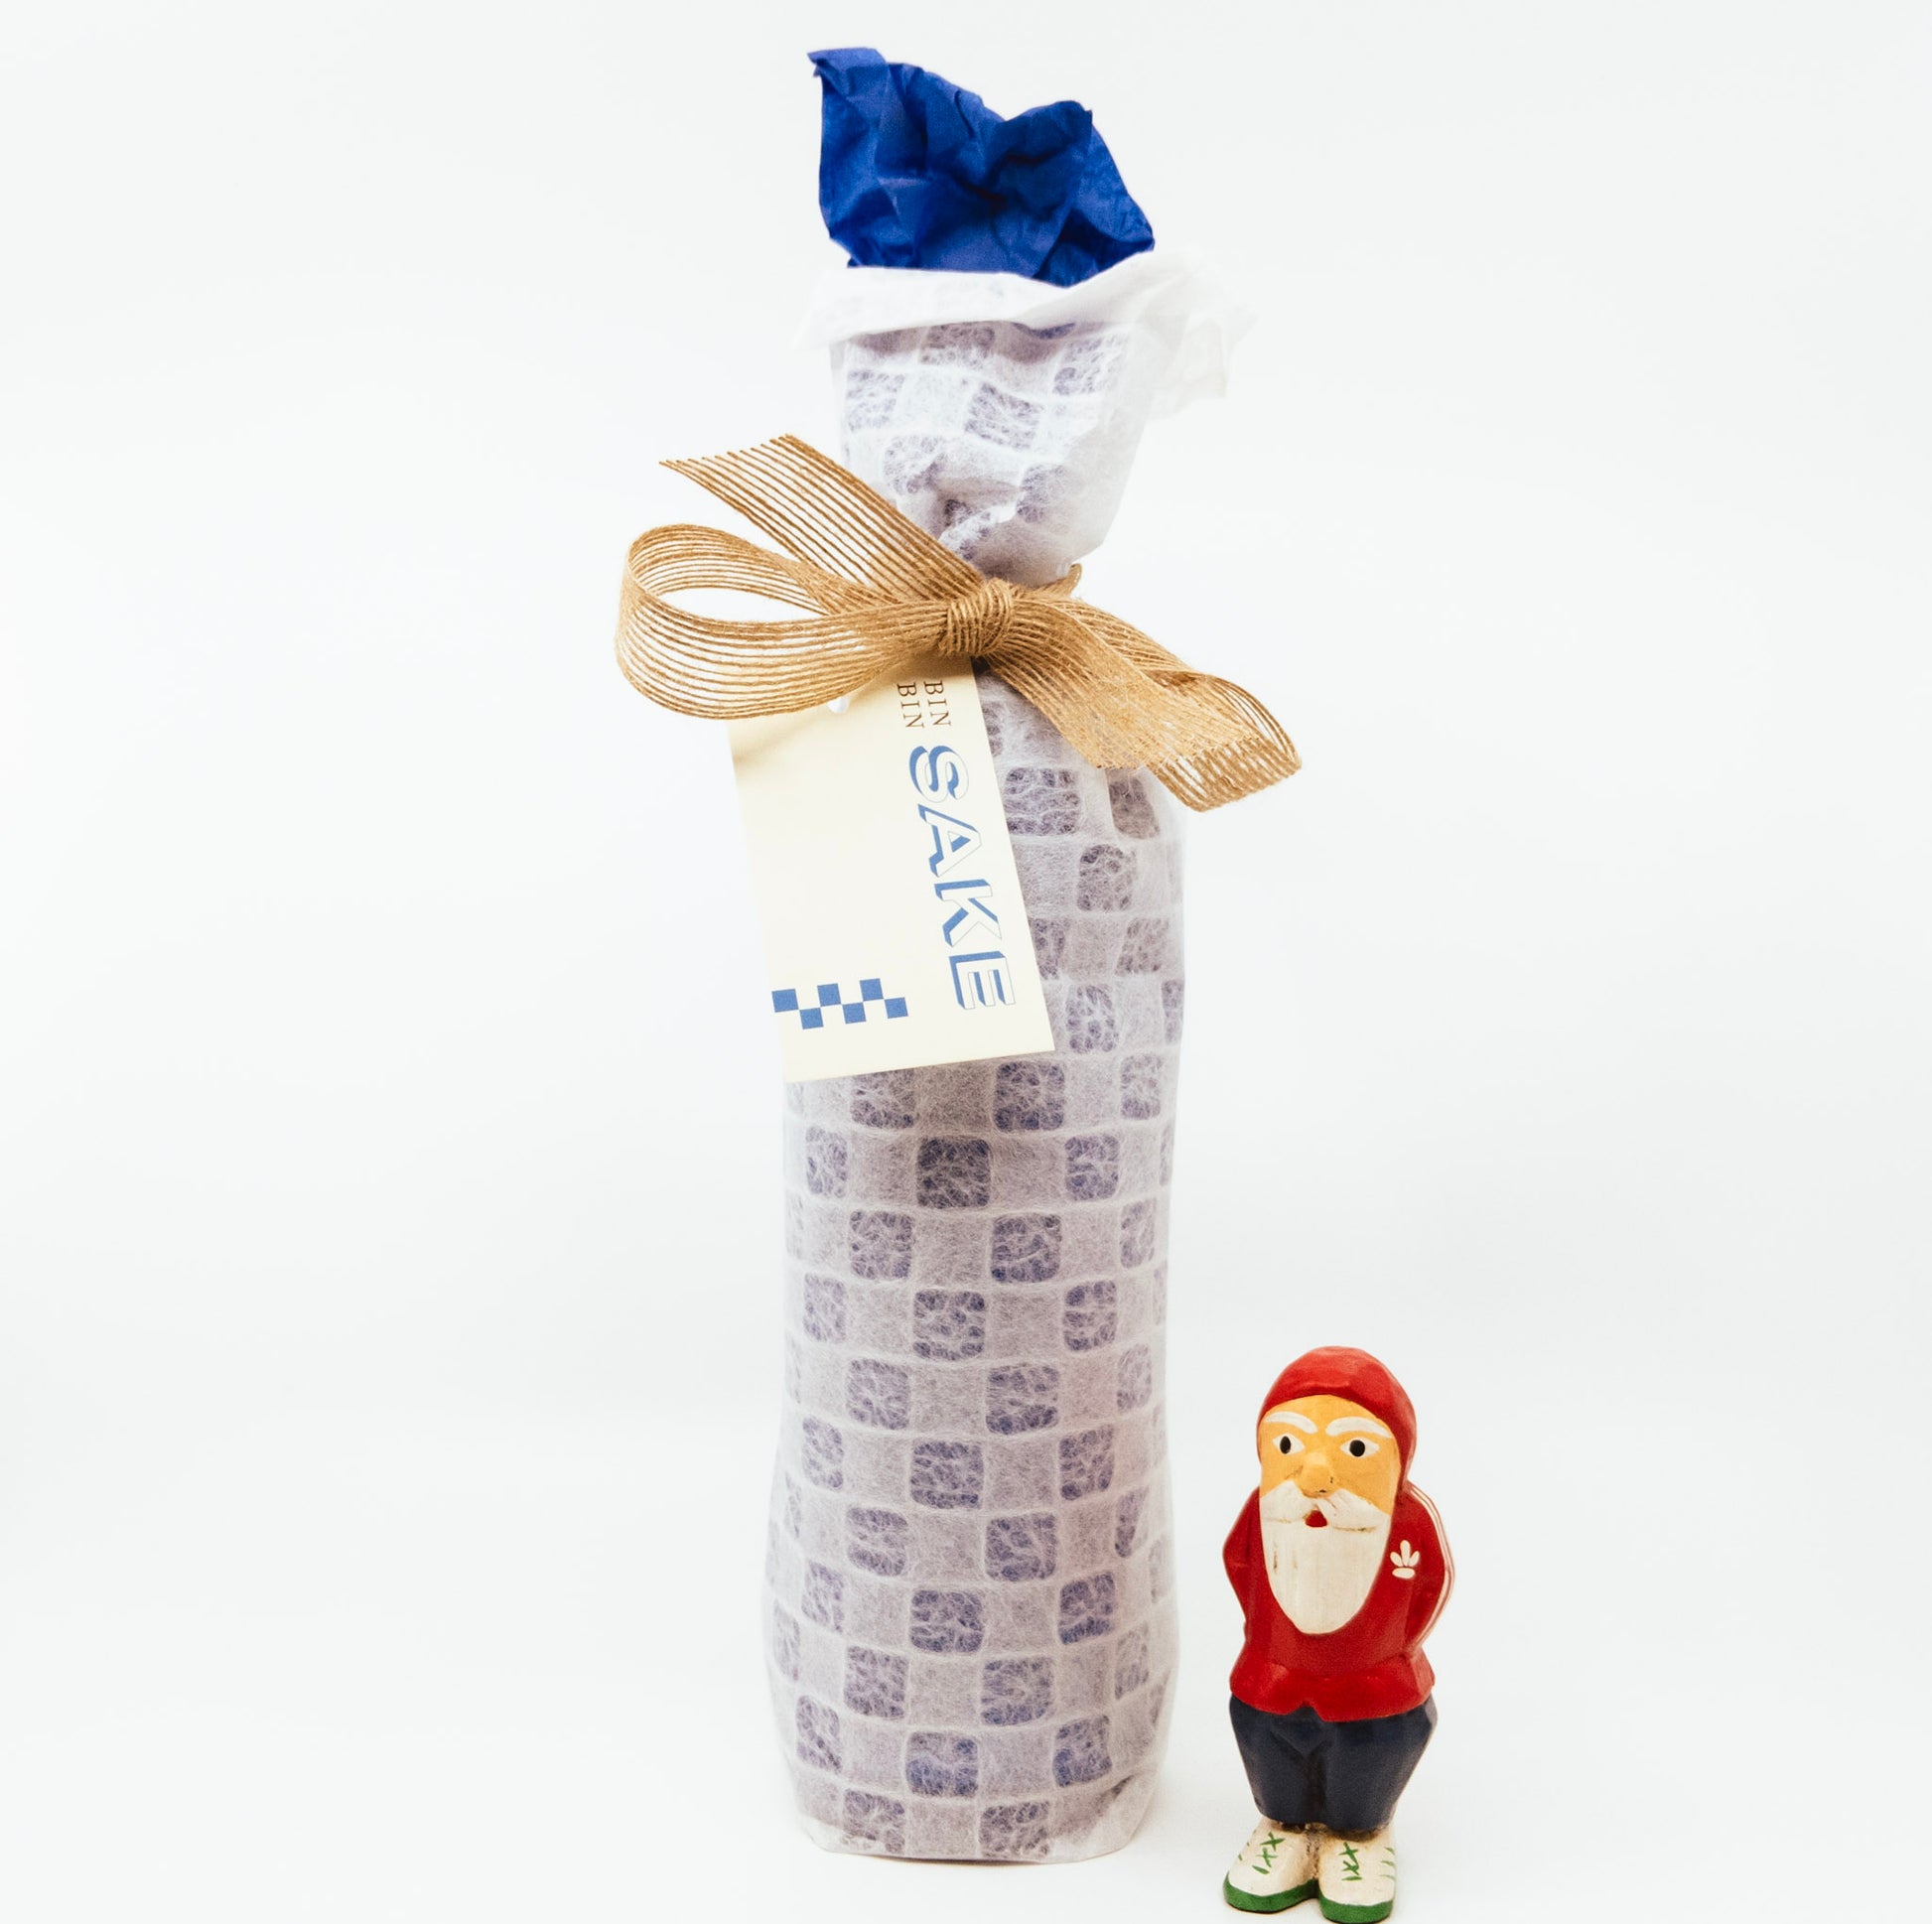 santa figurine next to wrapped bottle of wine